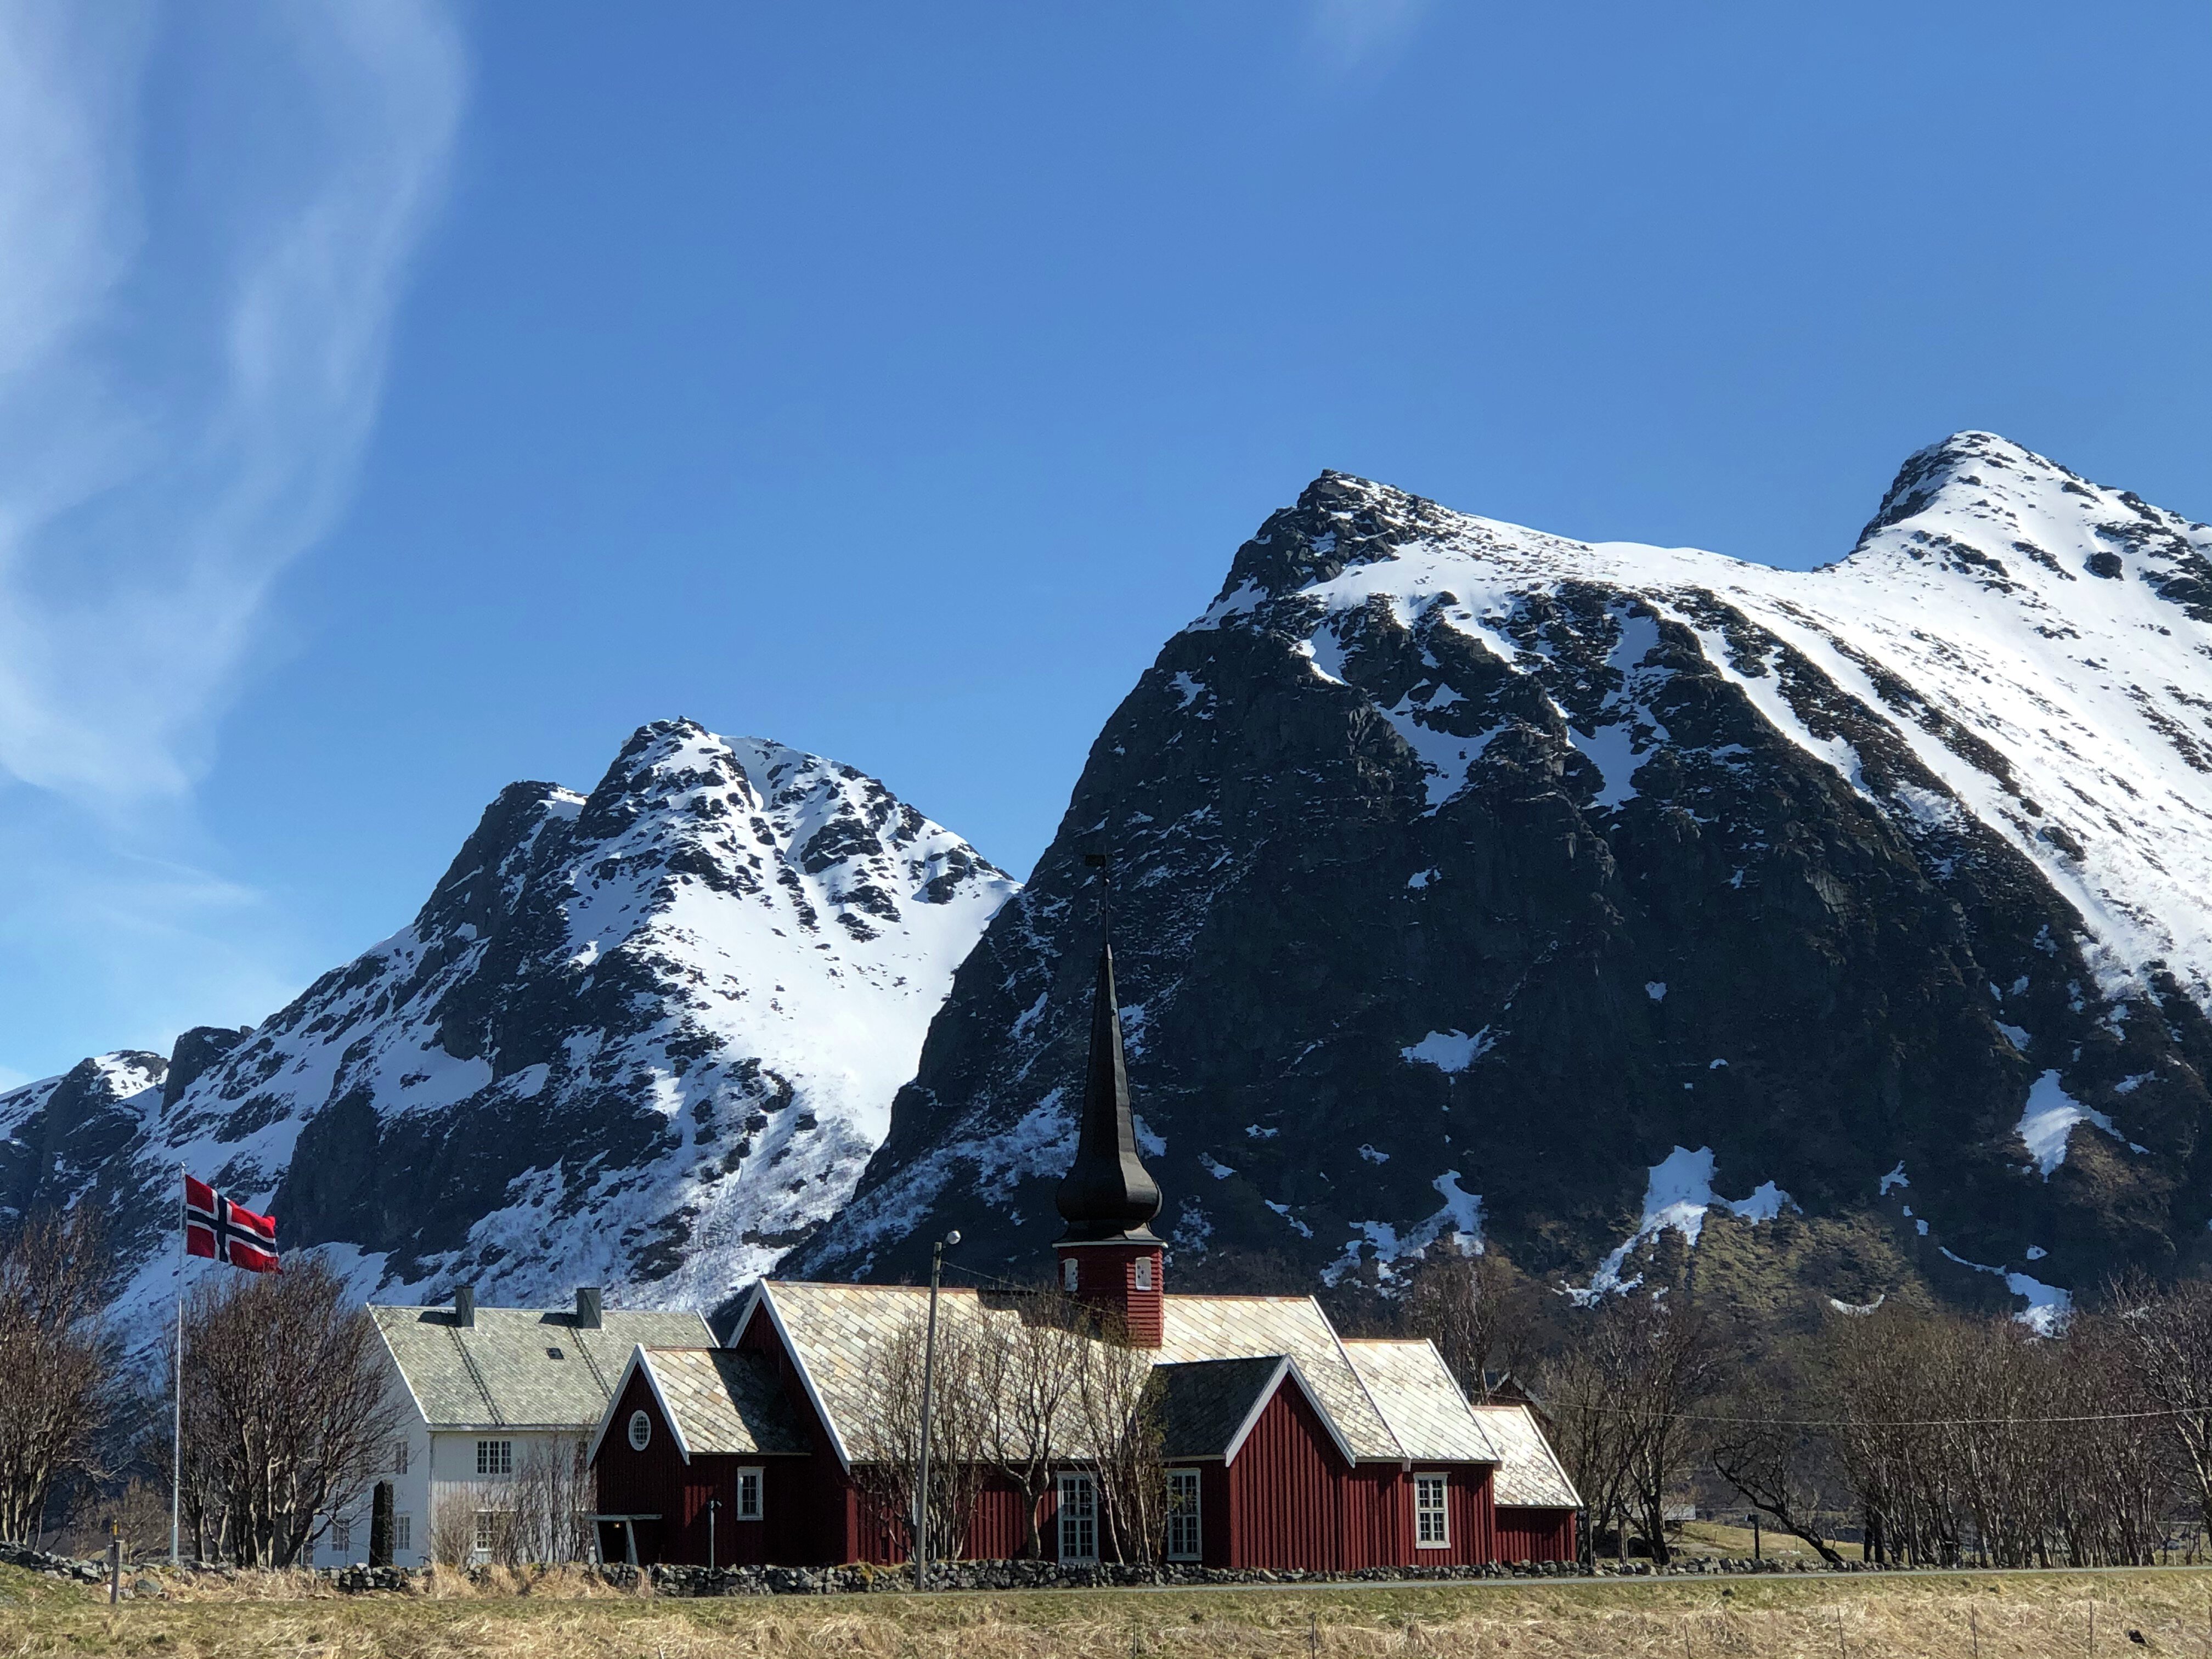 Flakstad Church on the day with snow